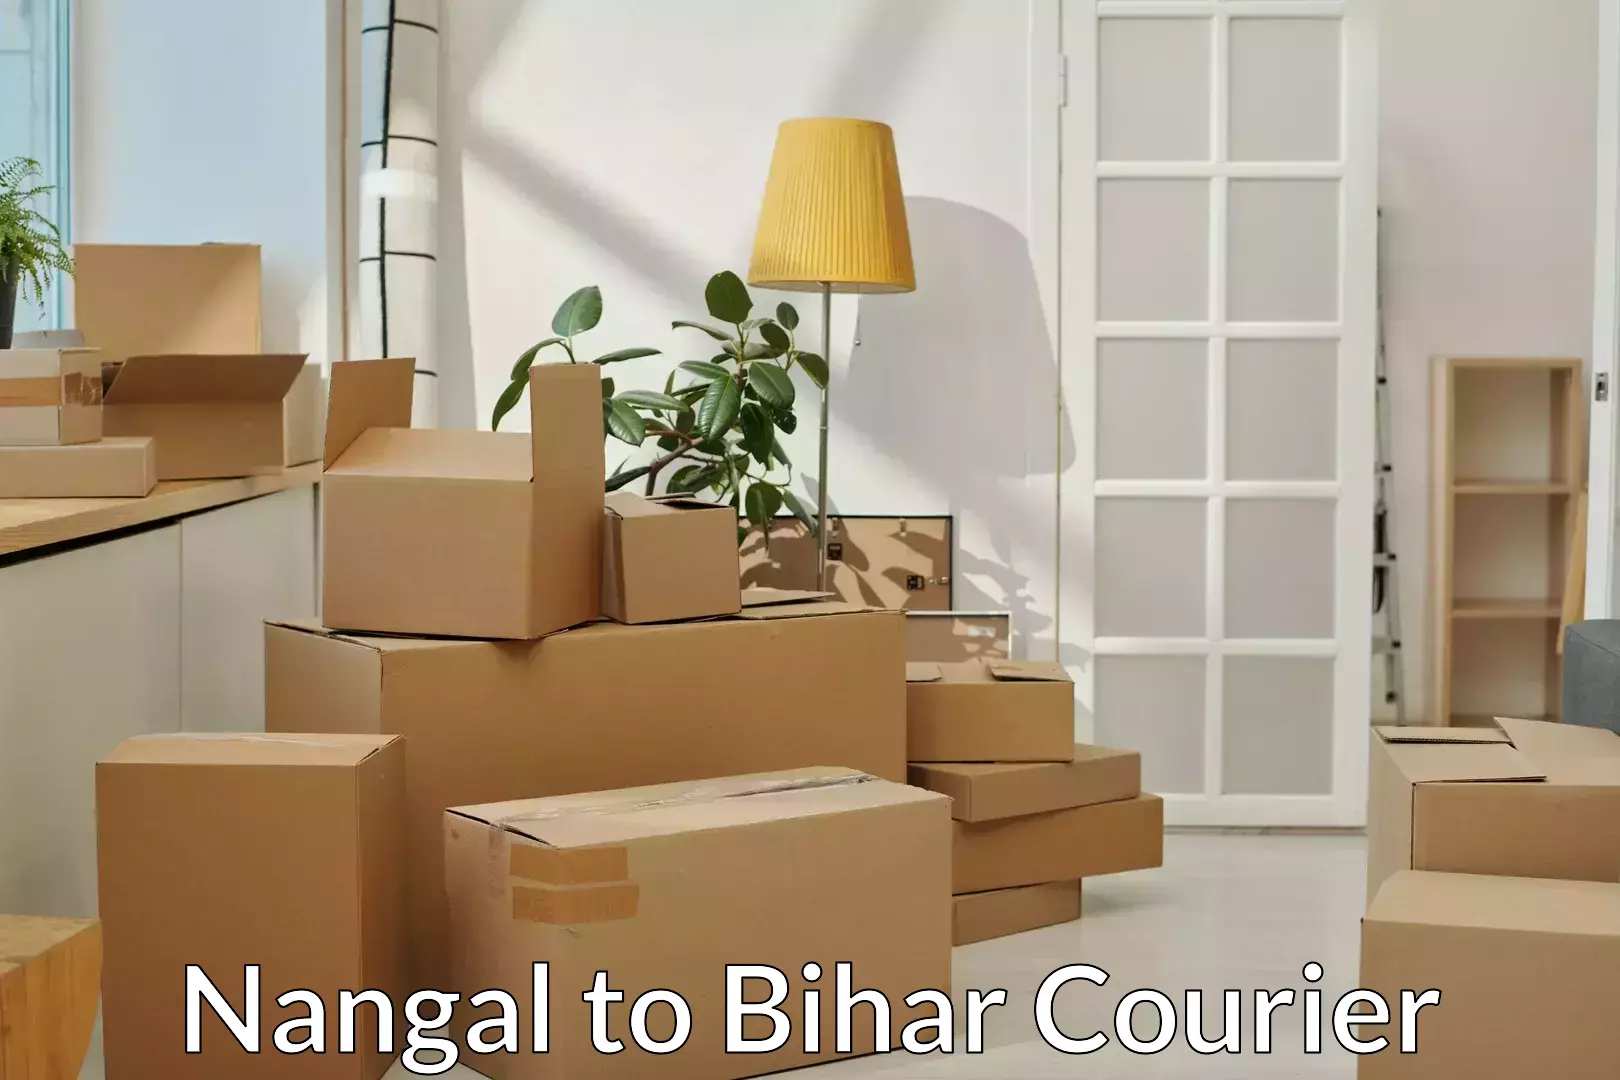 Trusted relocation experts Nangal to Bihar